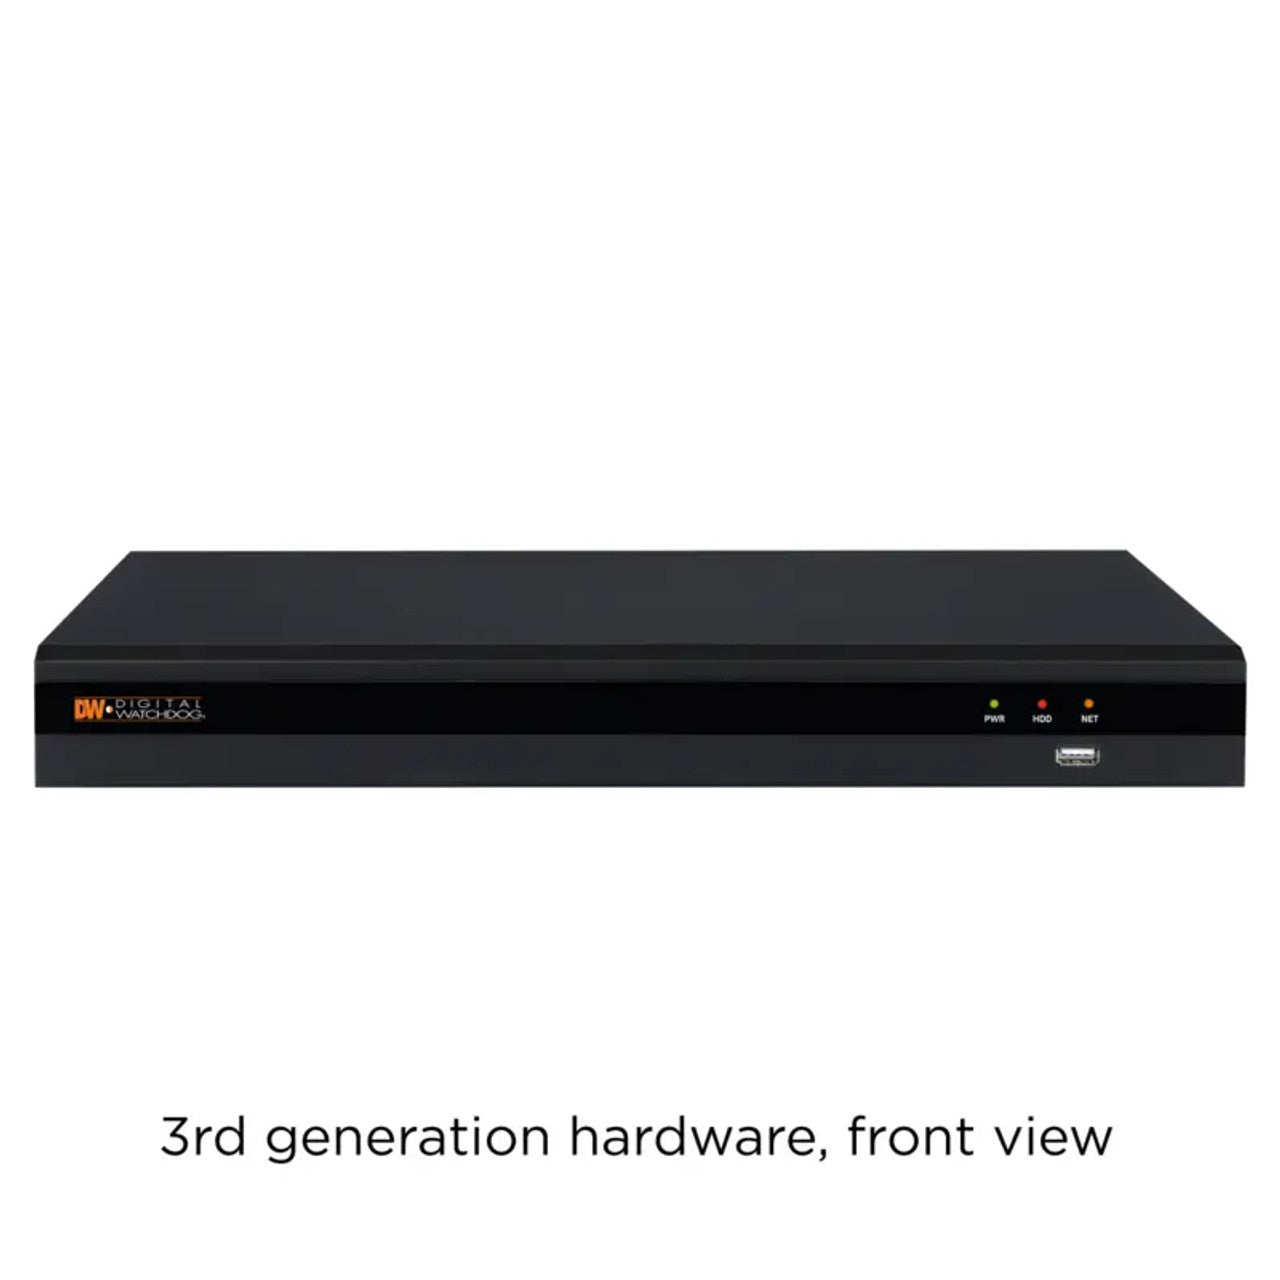 Digital Watchdog DW-VP916T4P 4-channel VMAX IP Plus PoE NVR with 5 virtual channels, 16TB HDD